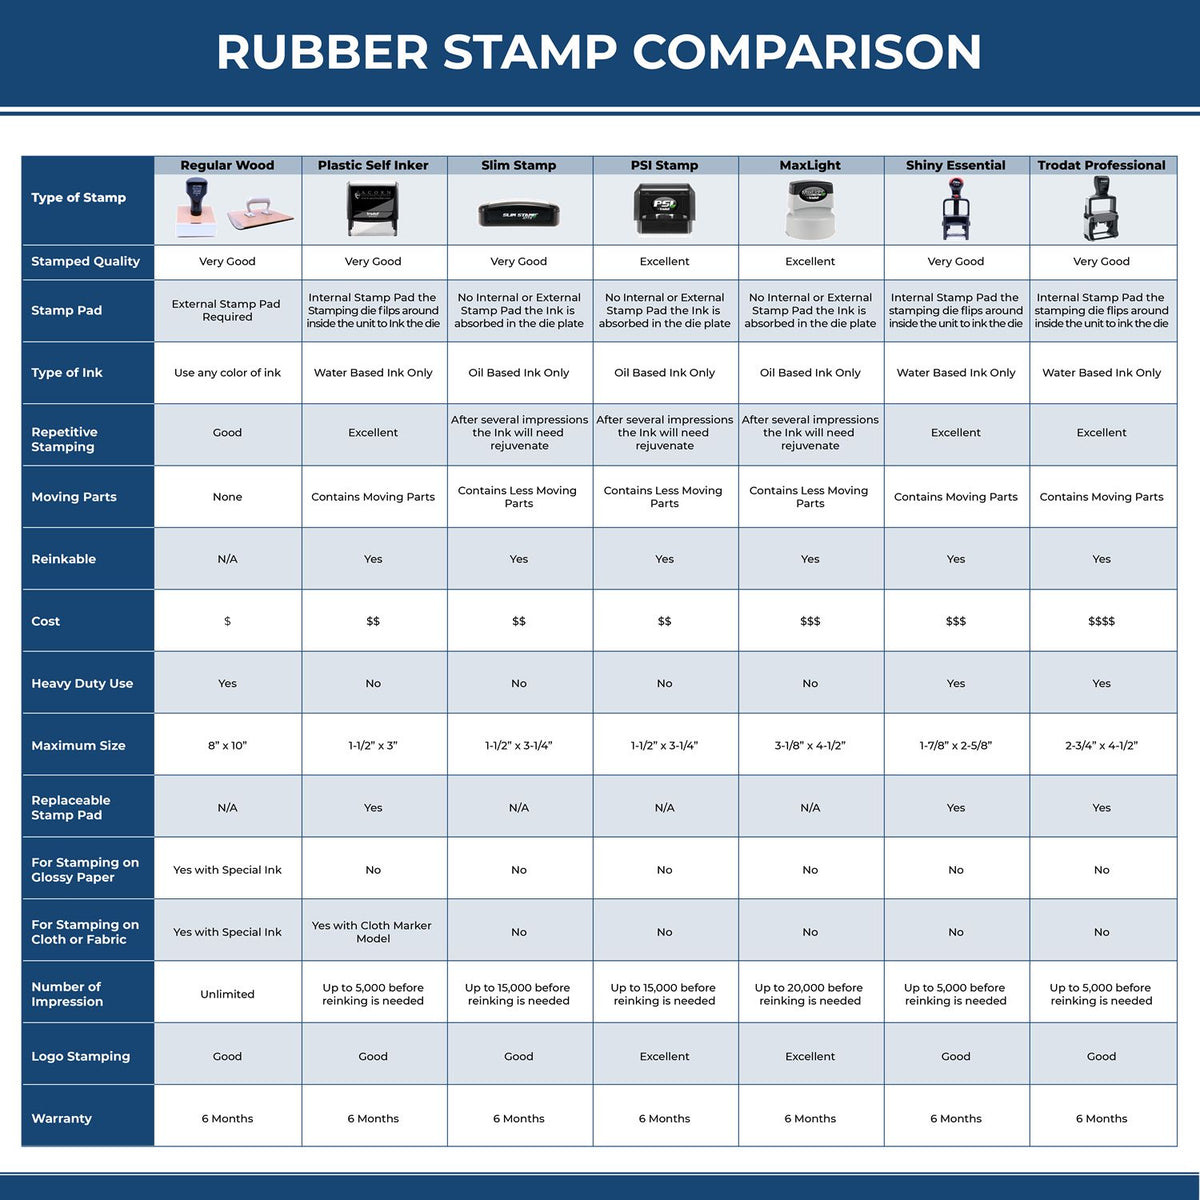 Investments Rubber Stamp 4268R Rubber Stamp Comparison